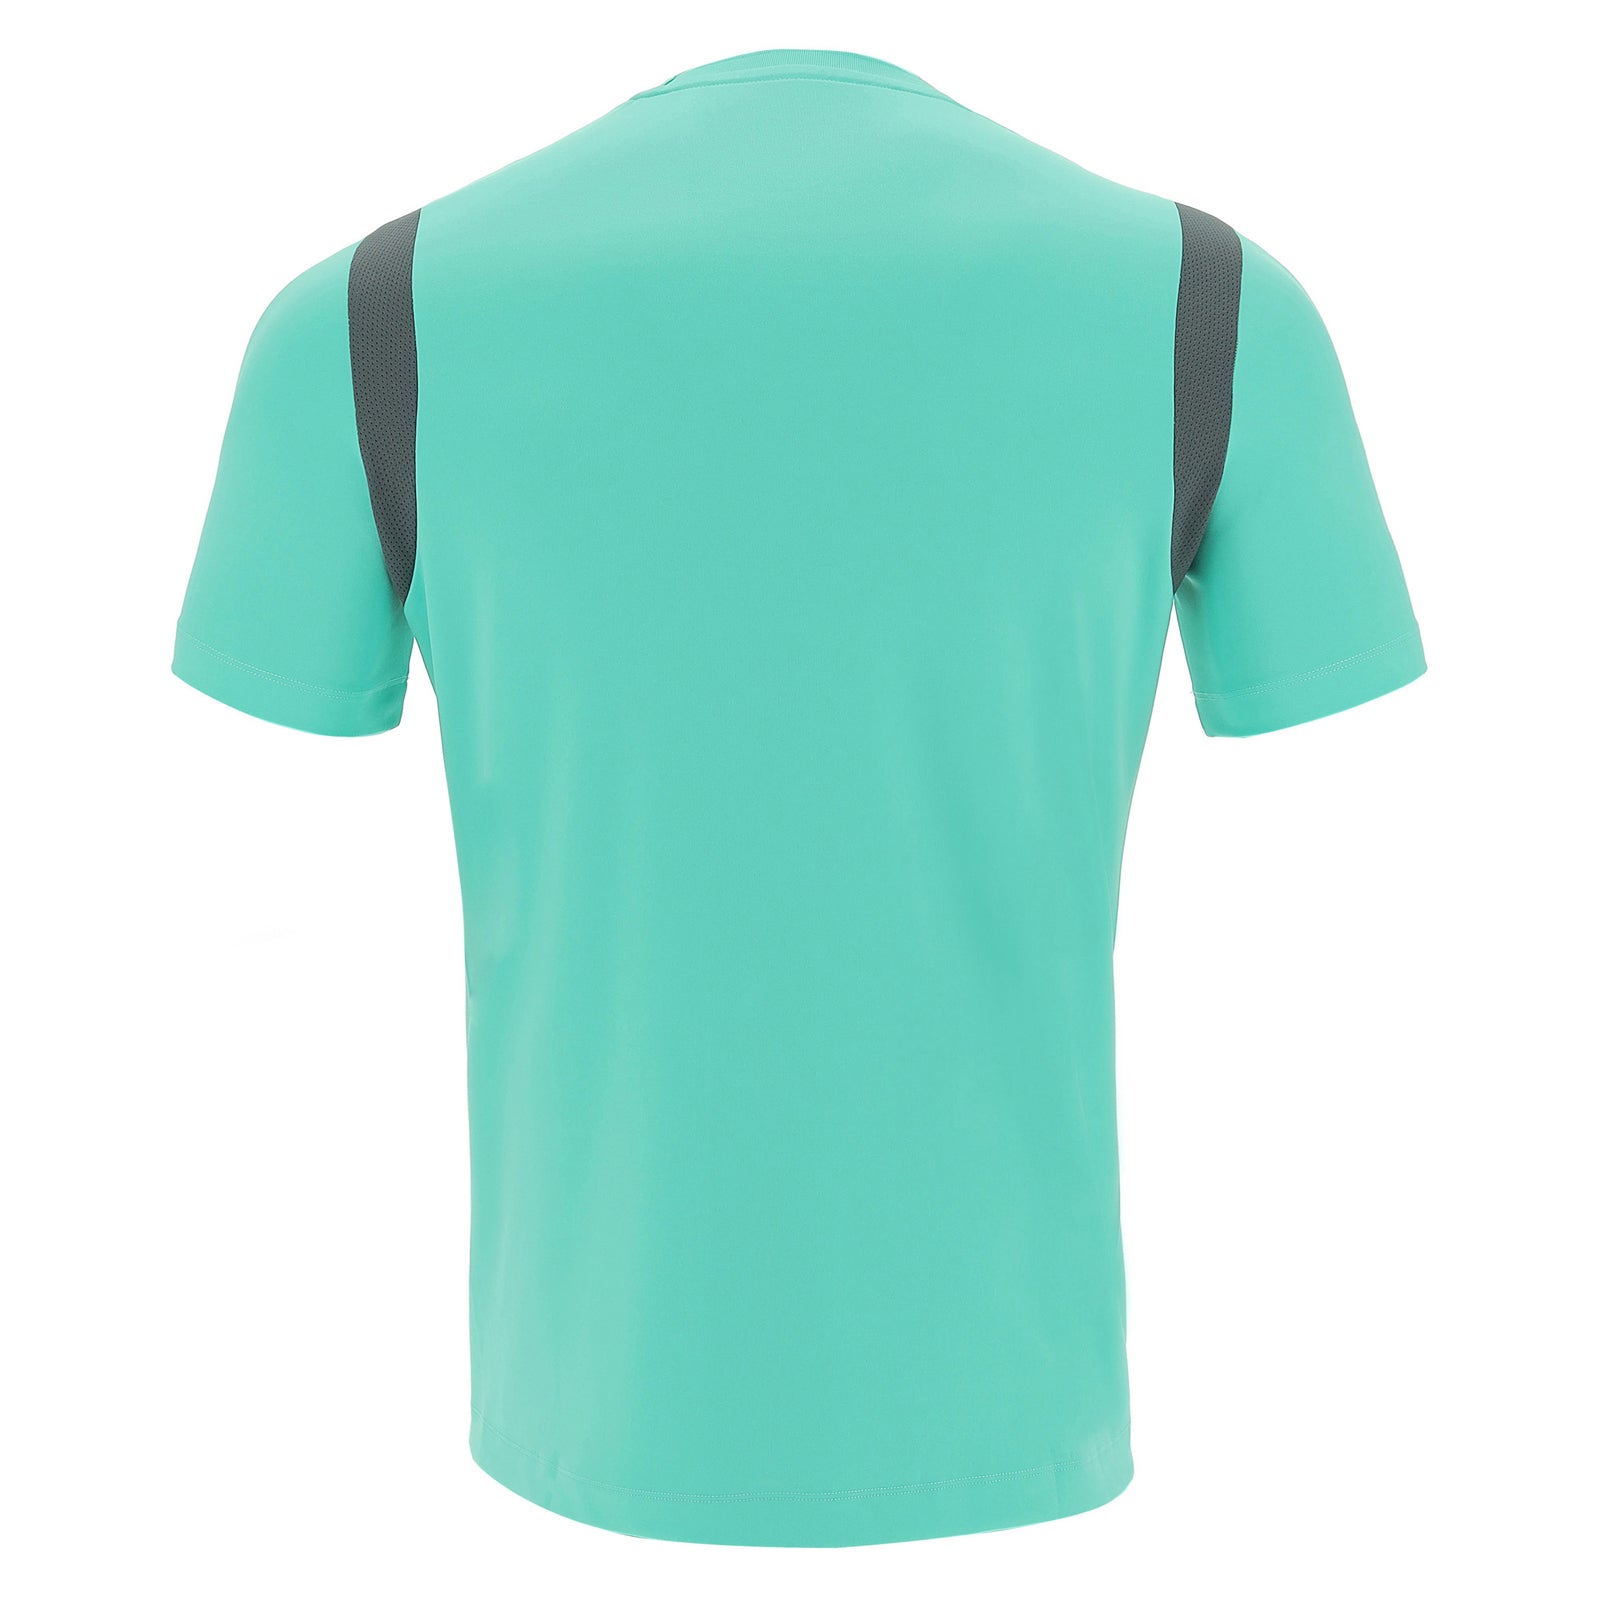 Photo of the Irish Squash 'Rodders' Match Day Shirt in Turquoise, back-view